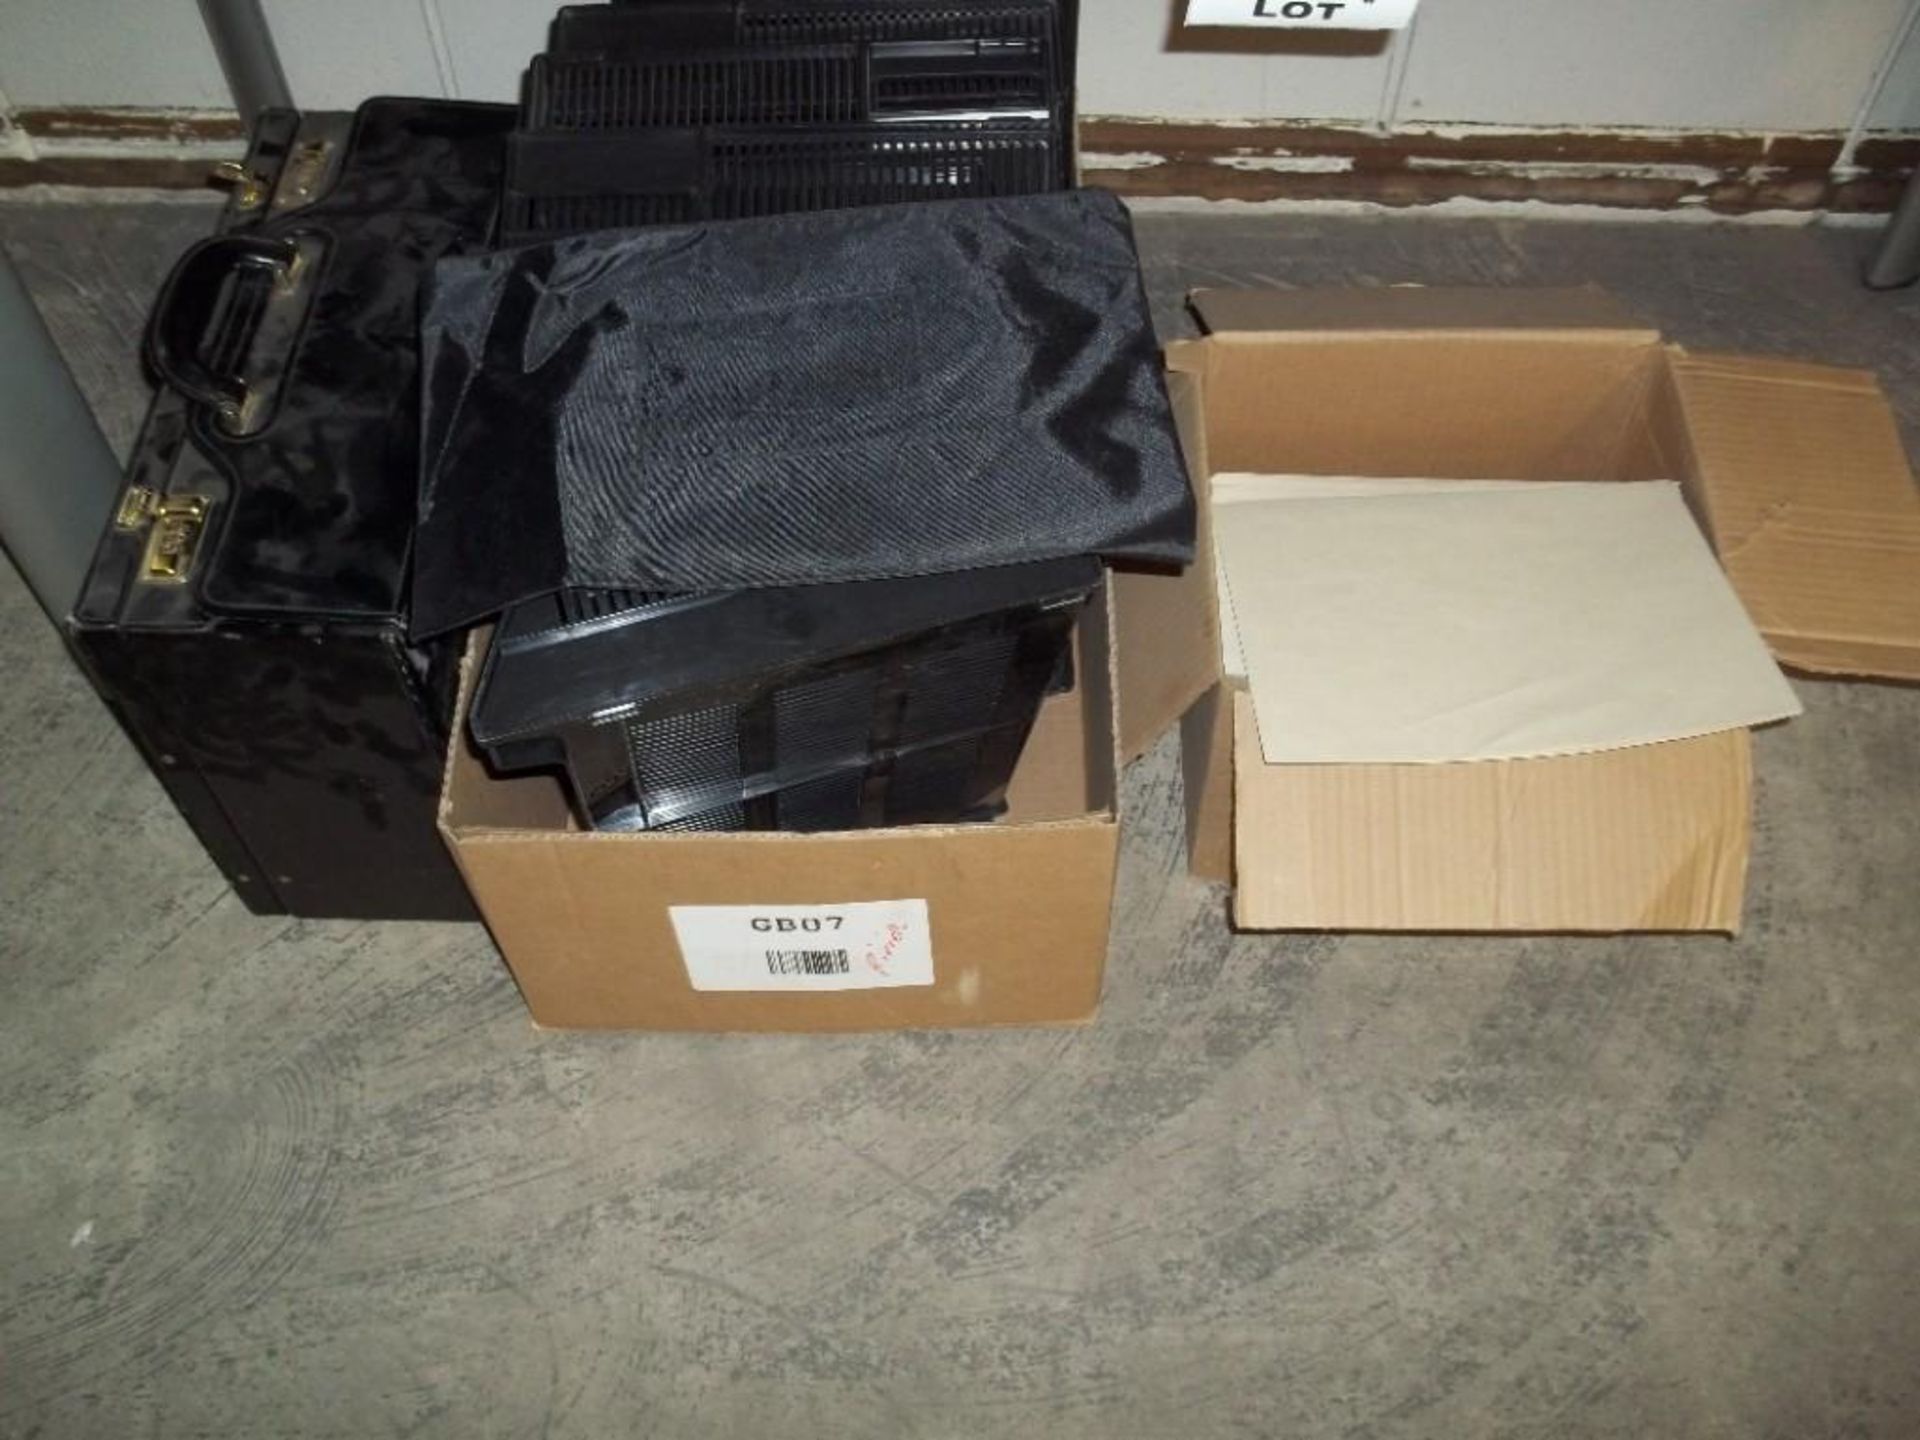 Large Lot Of Assorted Office Supplies Packed In Boxes - Image 4 of 4